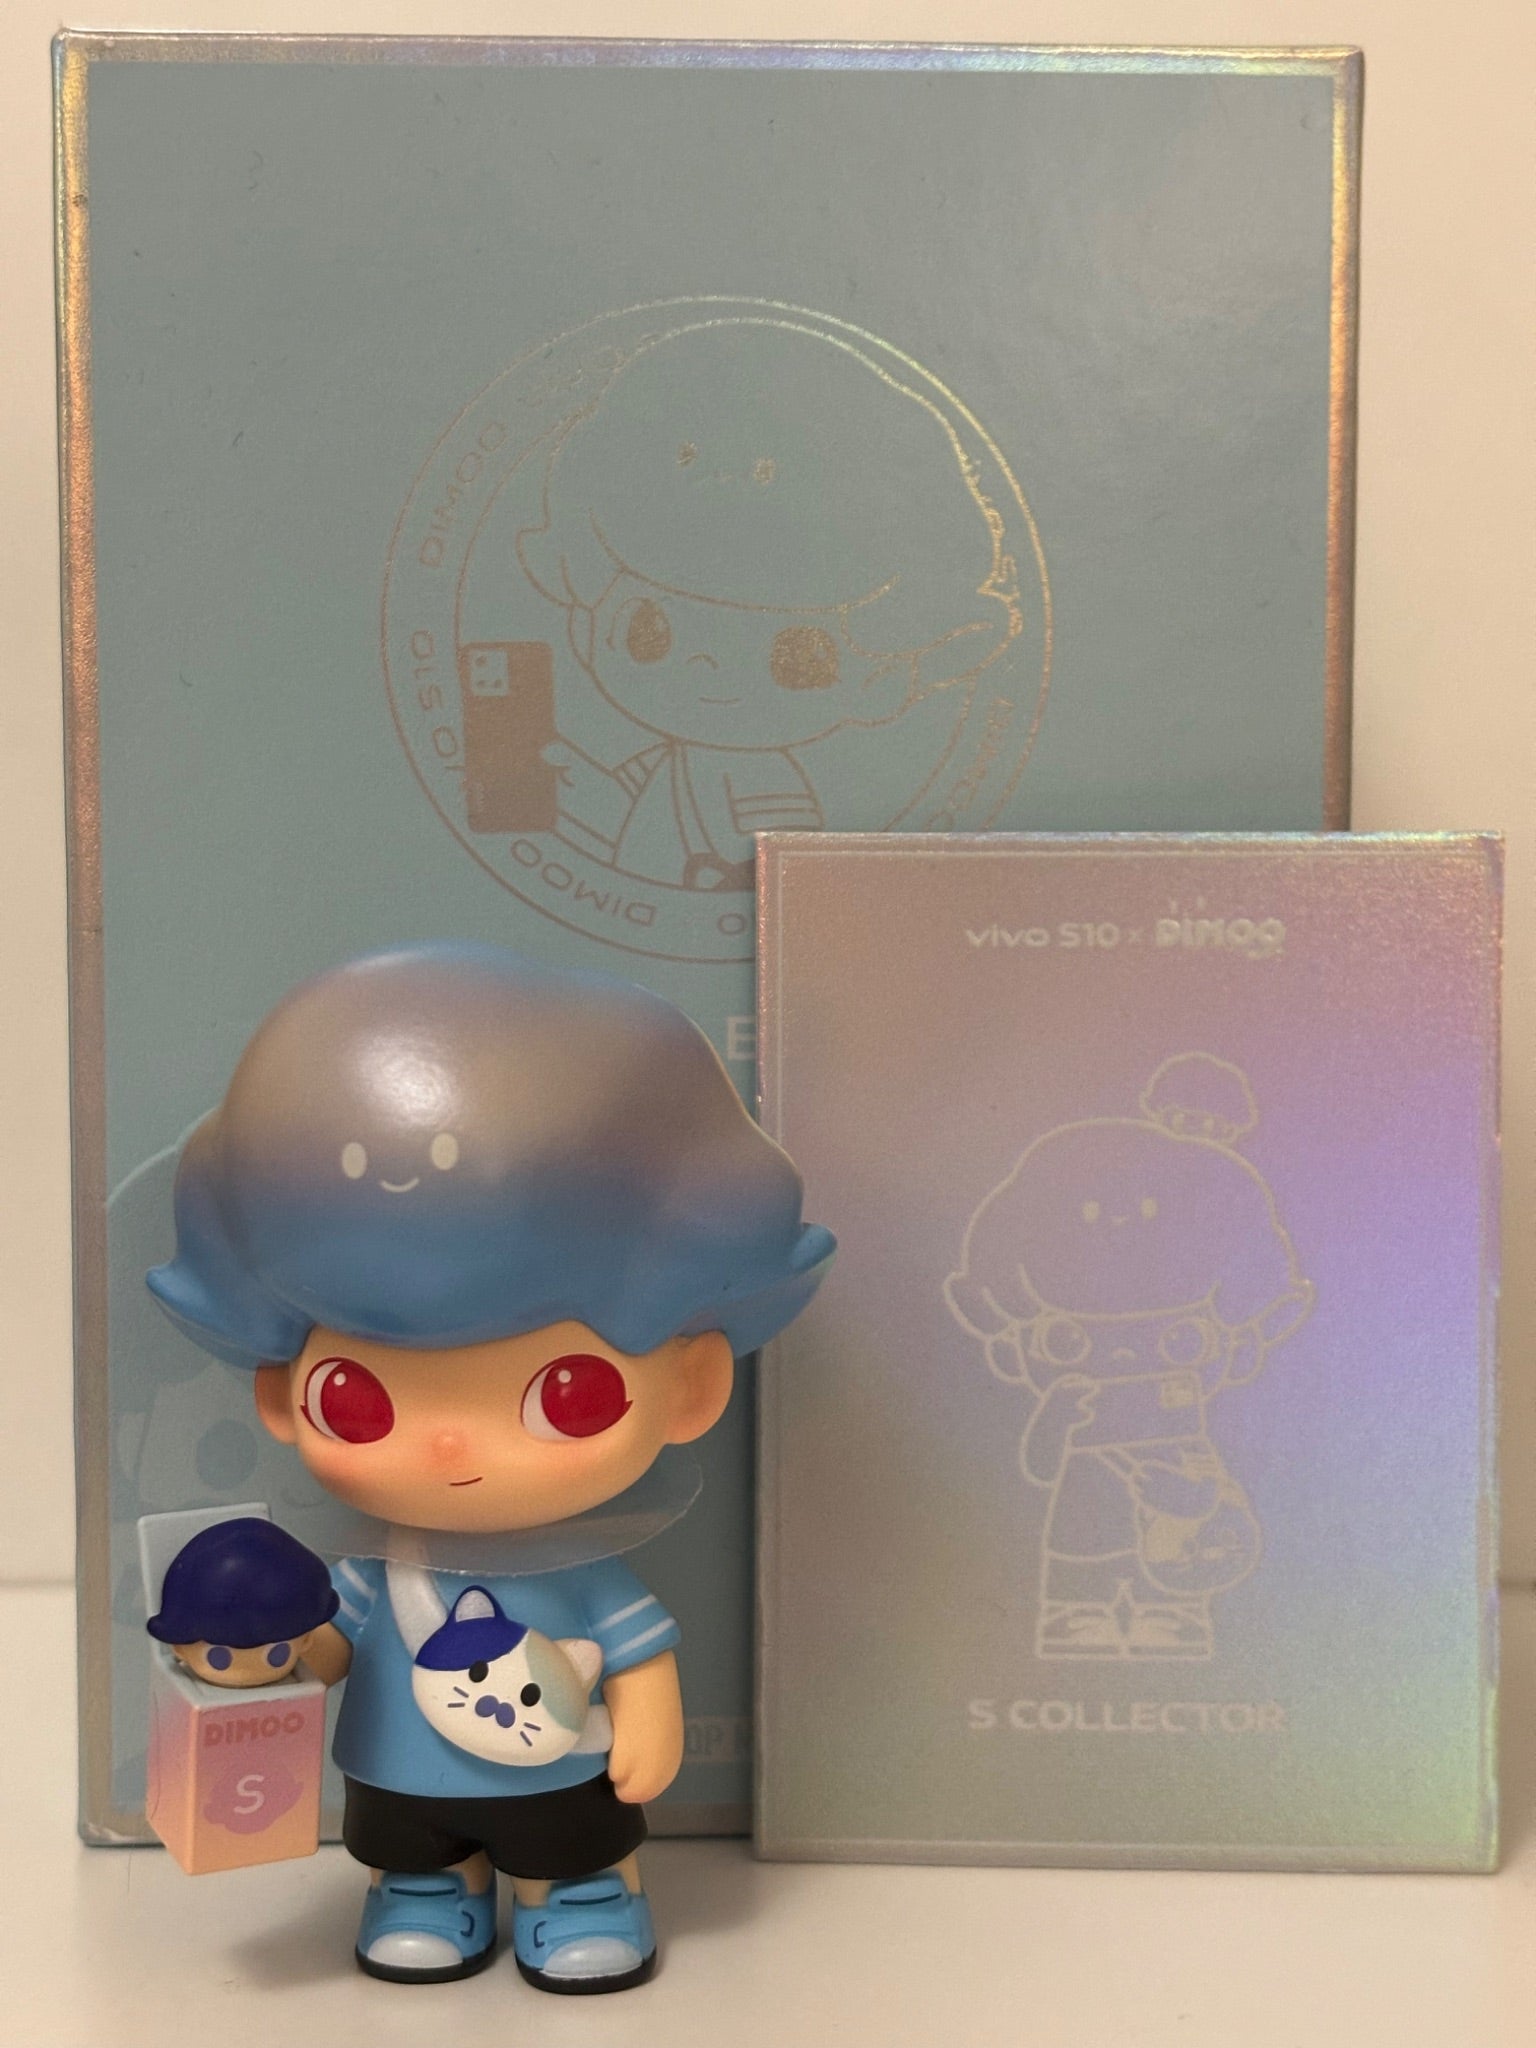 Dimoo - Vivo S10 Limited Edition Collector Figure - 1